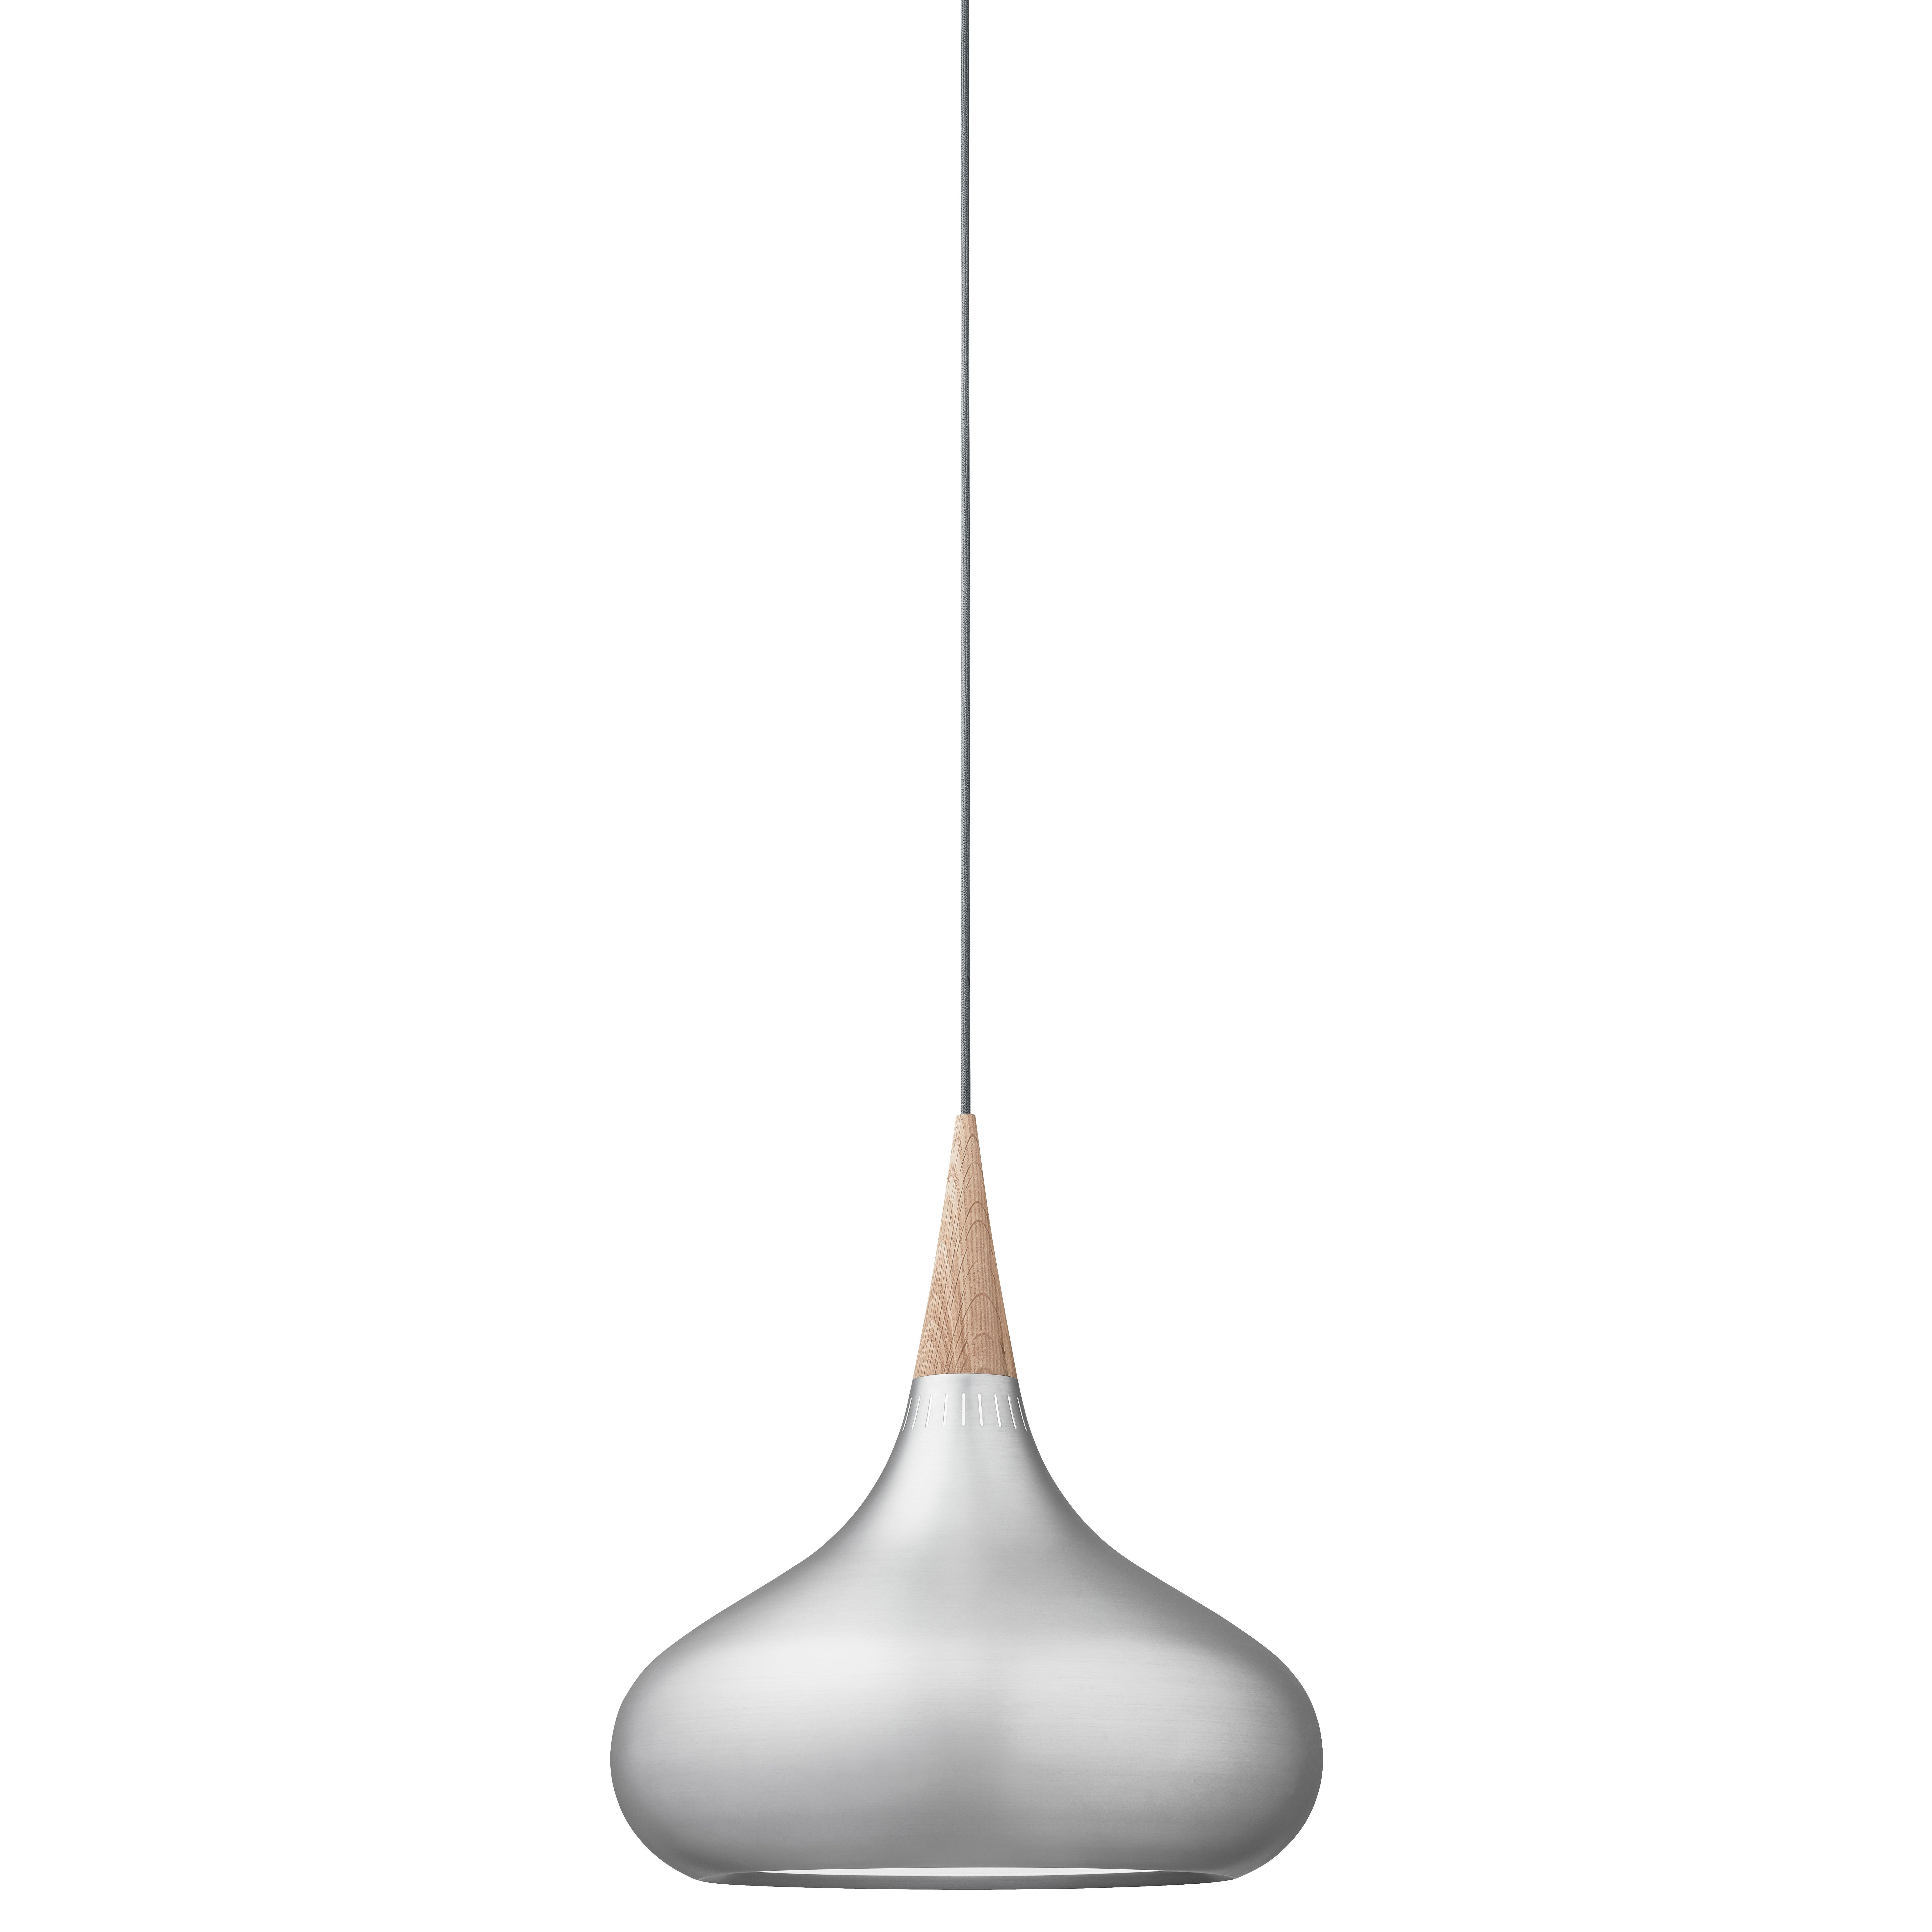 Small Jo Hammerborg 'Orient' Pendant Lamp for Fritz Hansen in Aluminum and Oak In New Condition For Sale In Glendale, CA